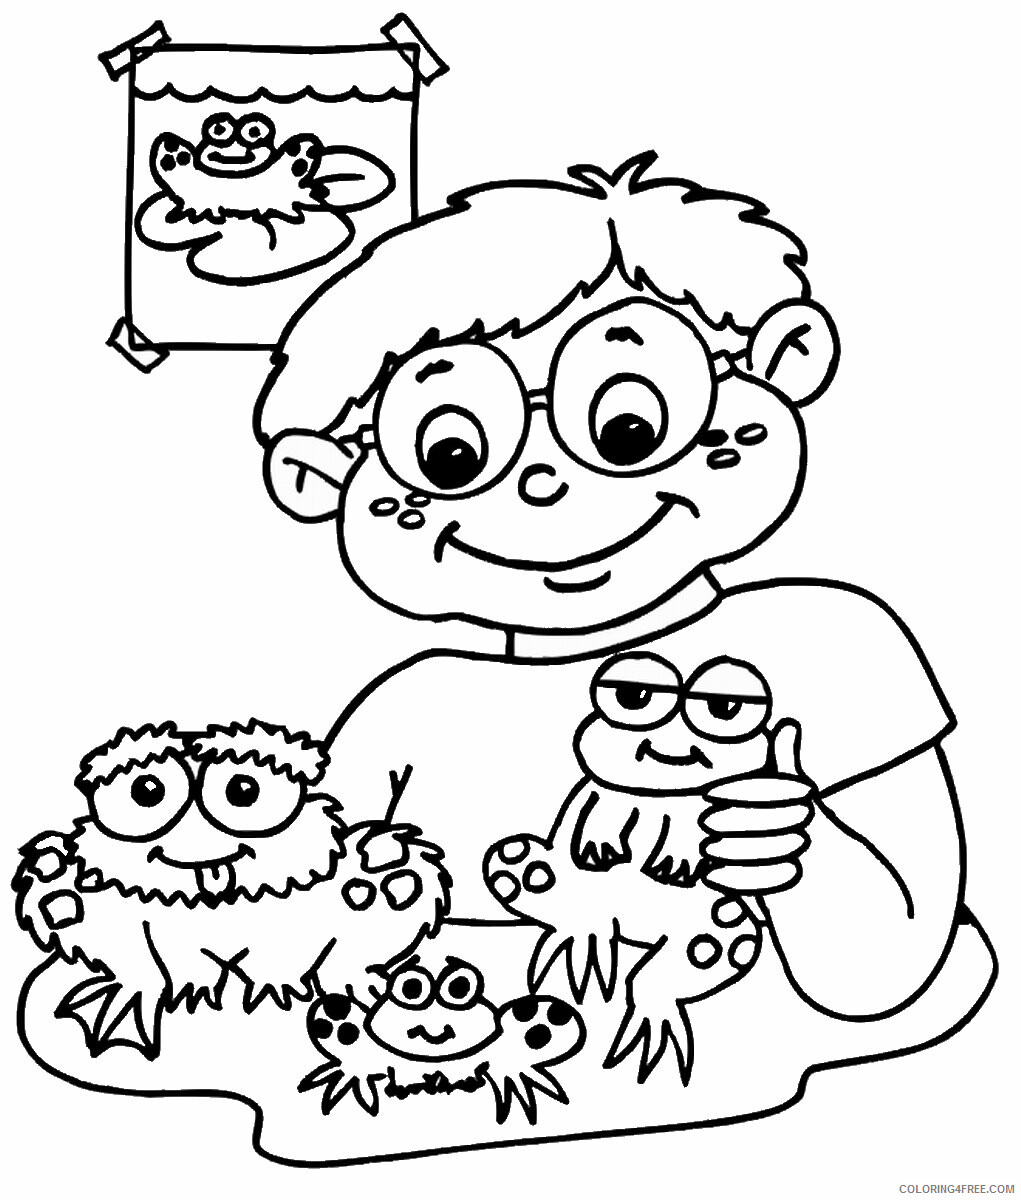 Frog Coloring Pages Animal Printable Sheets frog_cl_11 2021 2285 Coloring4free